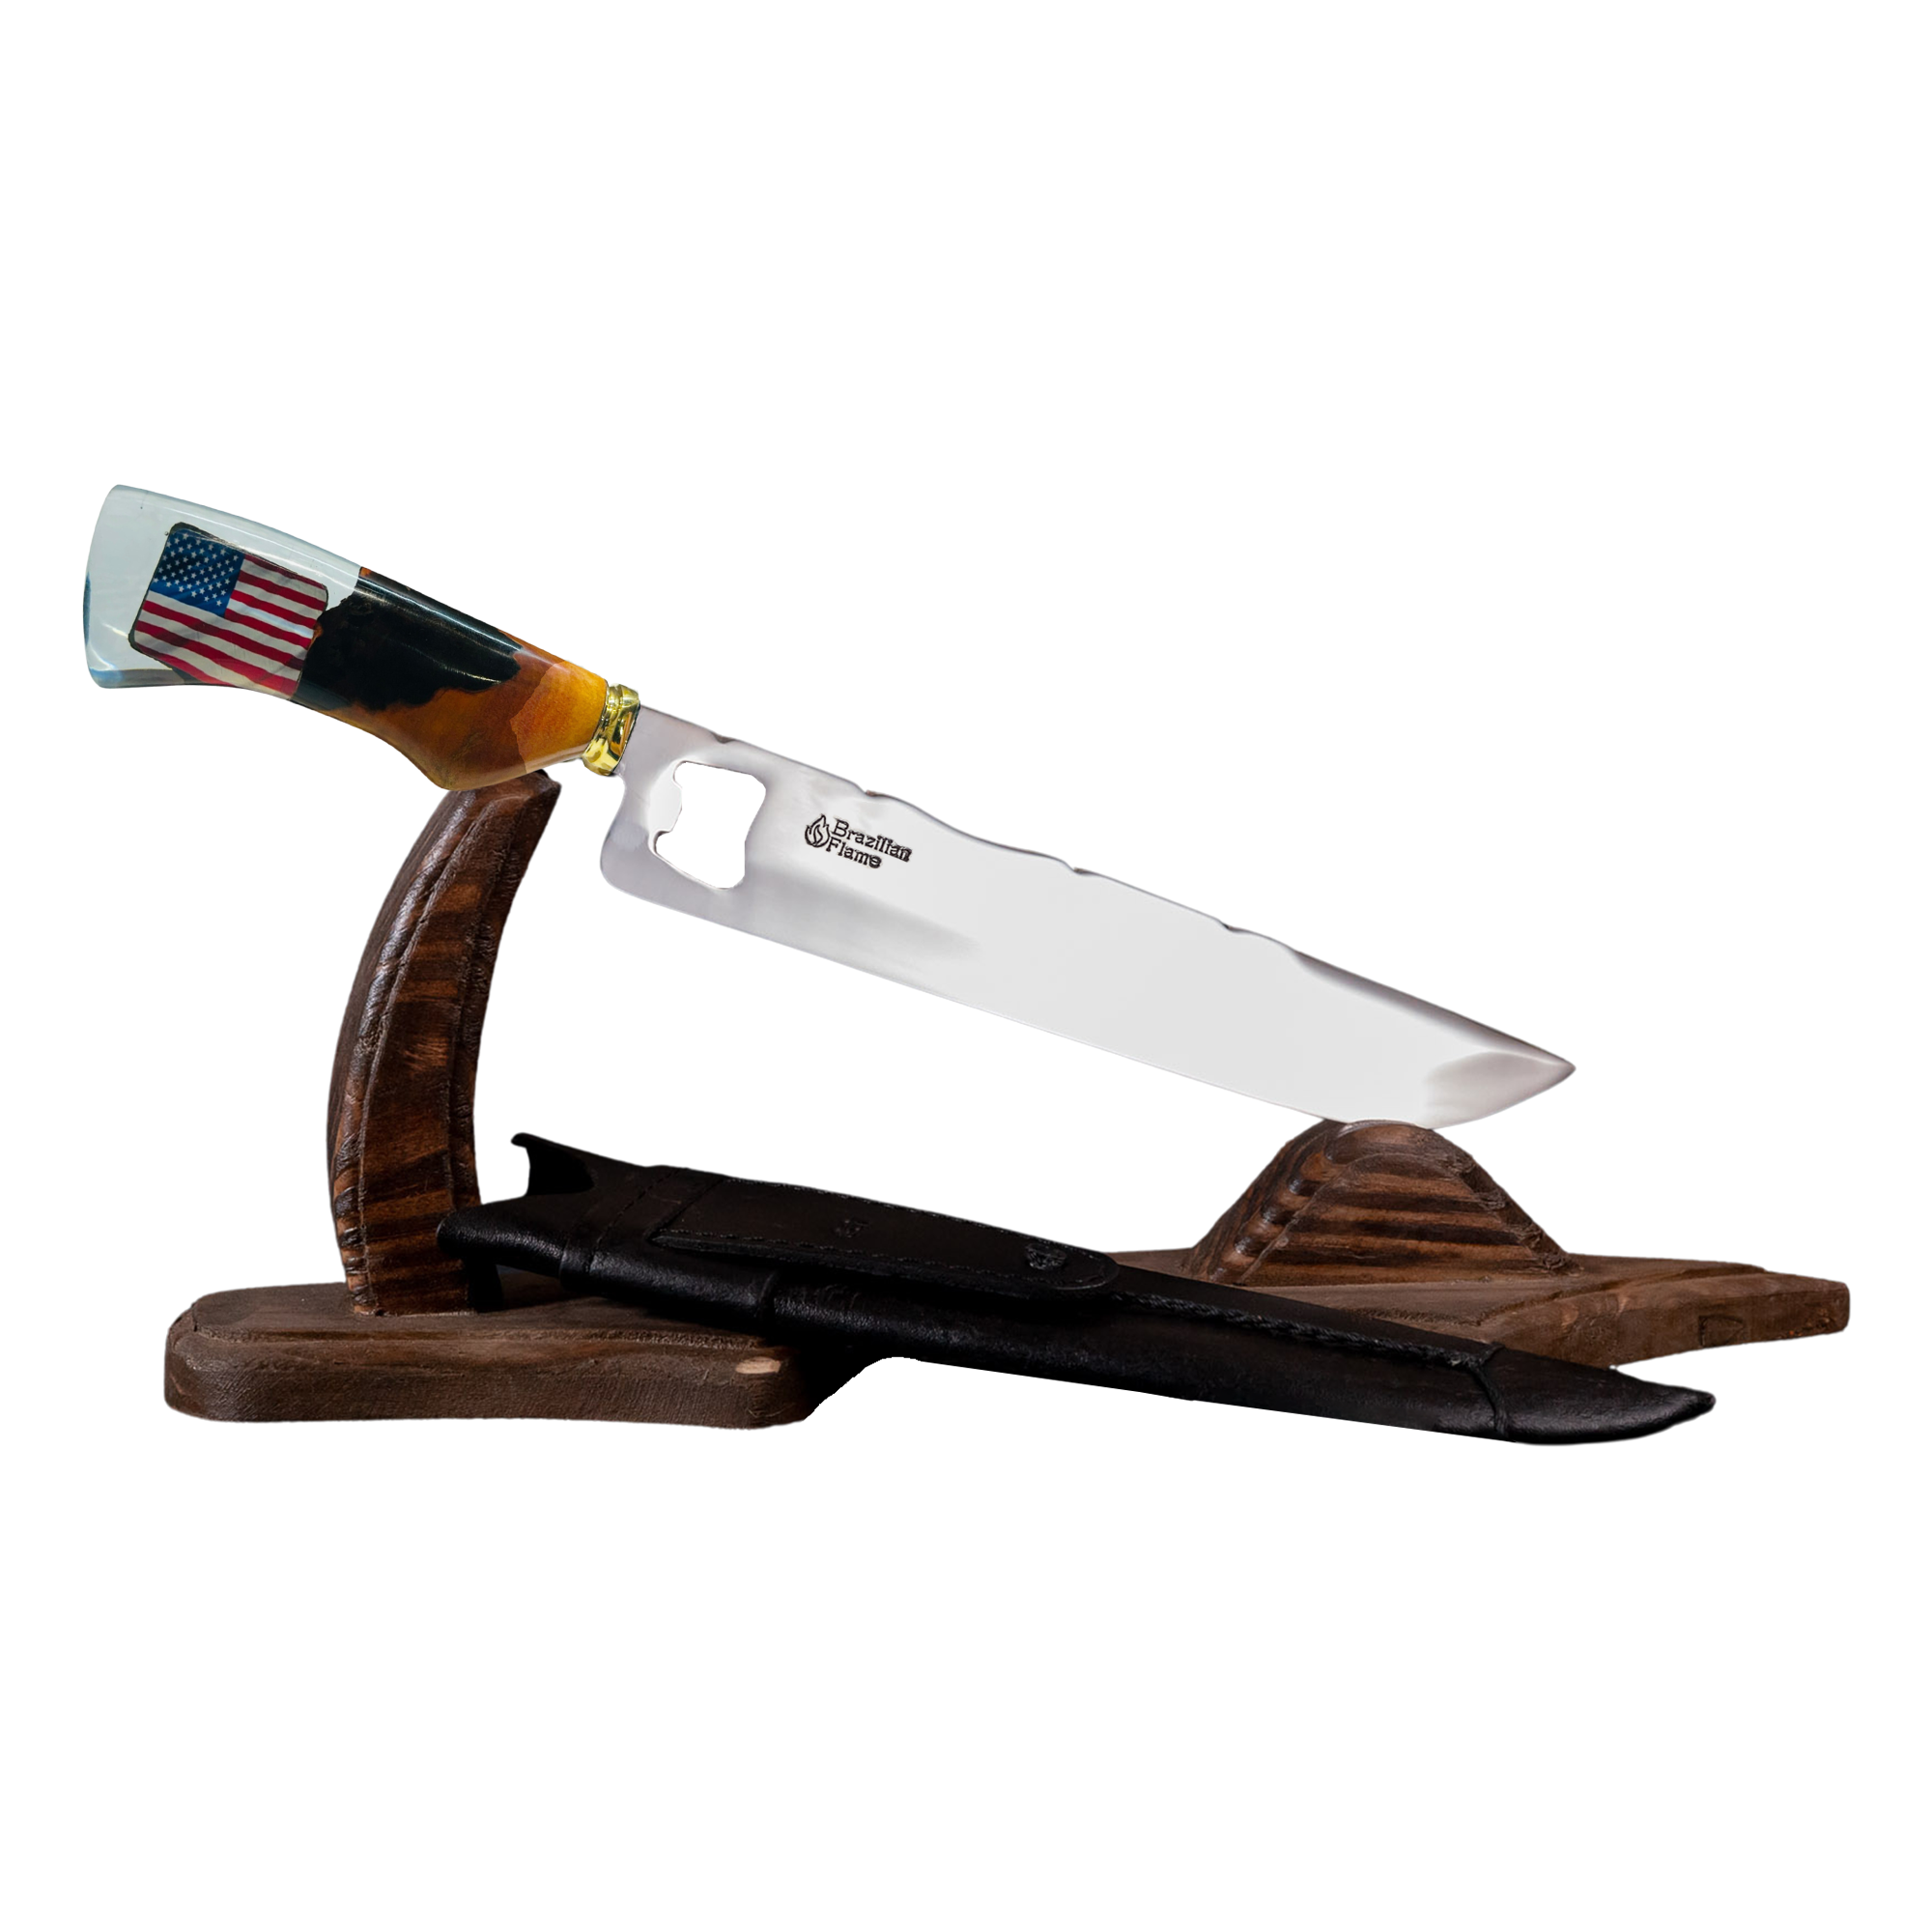 Brazilian Flame Chef Picanha 10-Inch Stainless Steel Knife